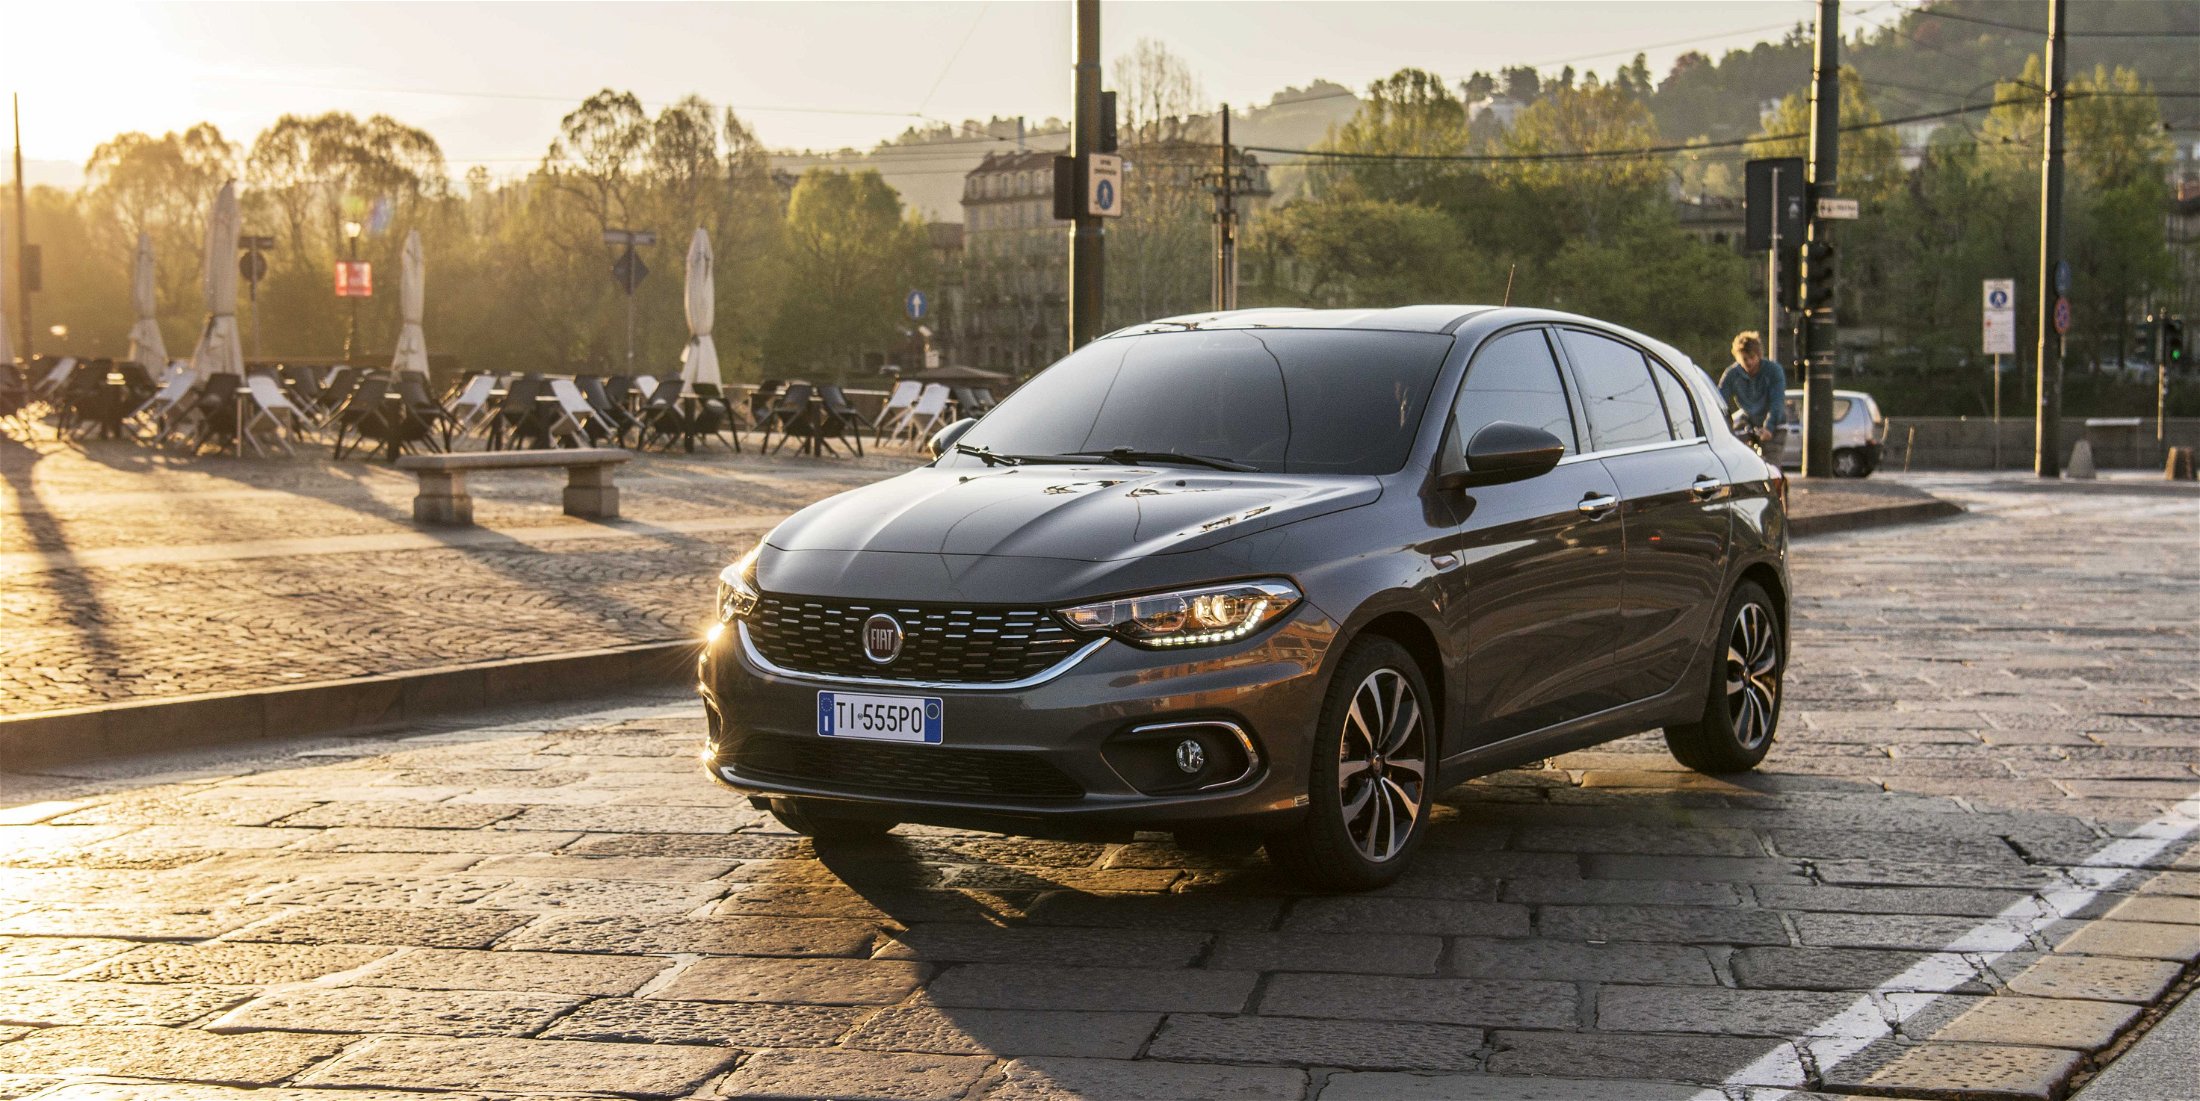 Review round-up: Fiat Tipo bounces back with space all round - Read Cars